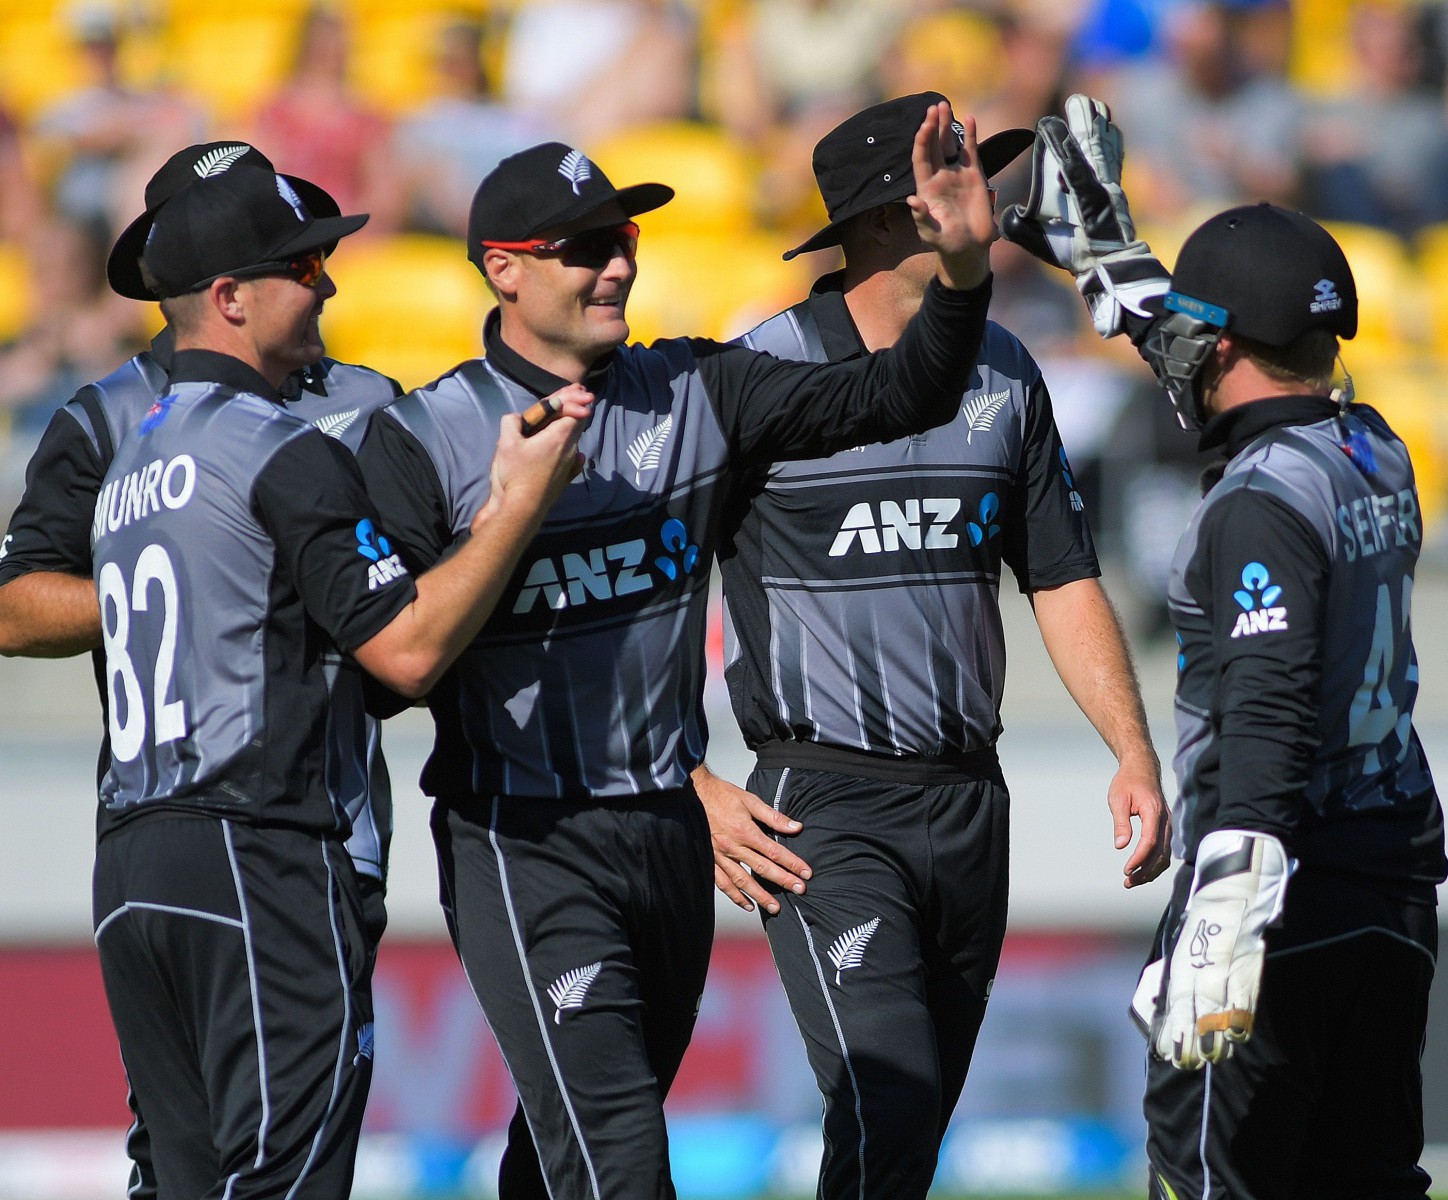 , Englands T20 side fail to rise to occasion at Cake Tin as they drop five catches and batsmen flop in New Zealand